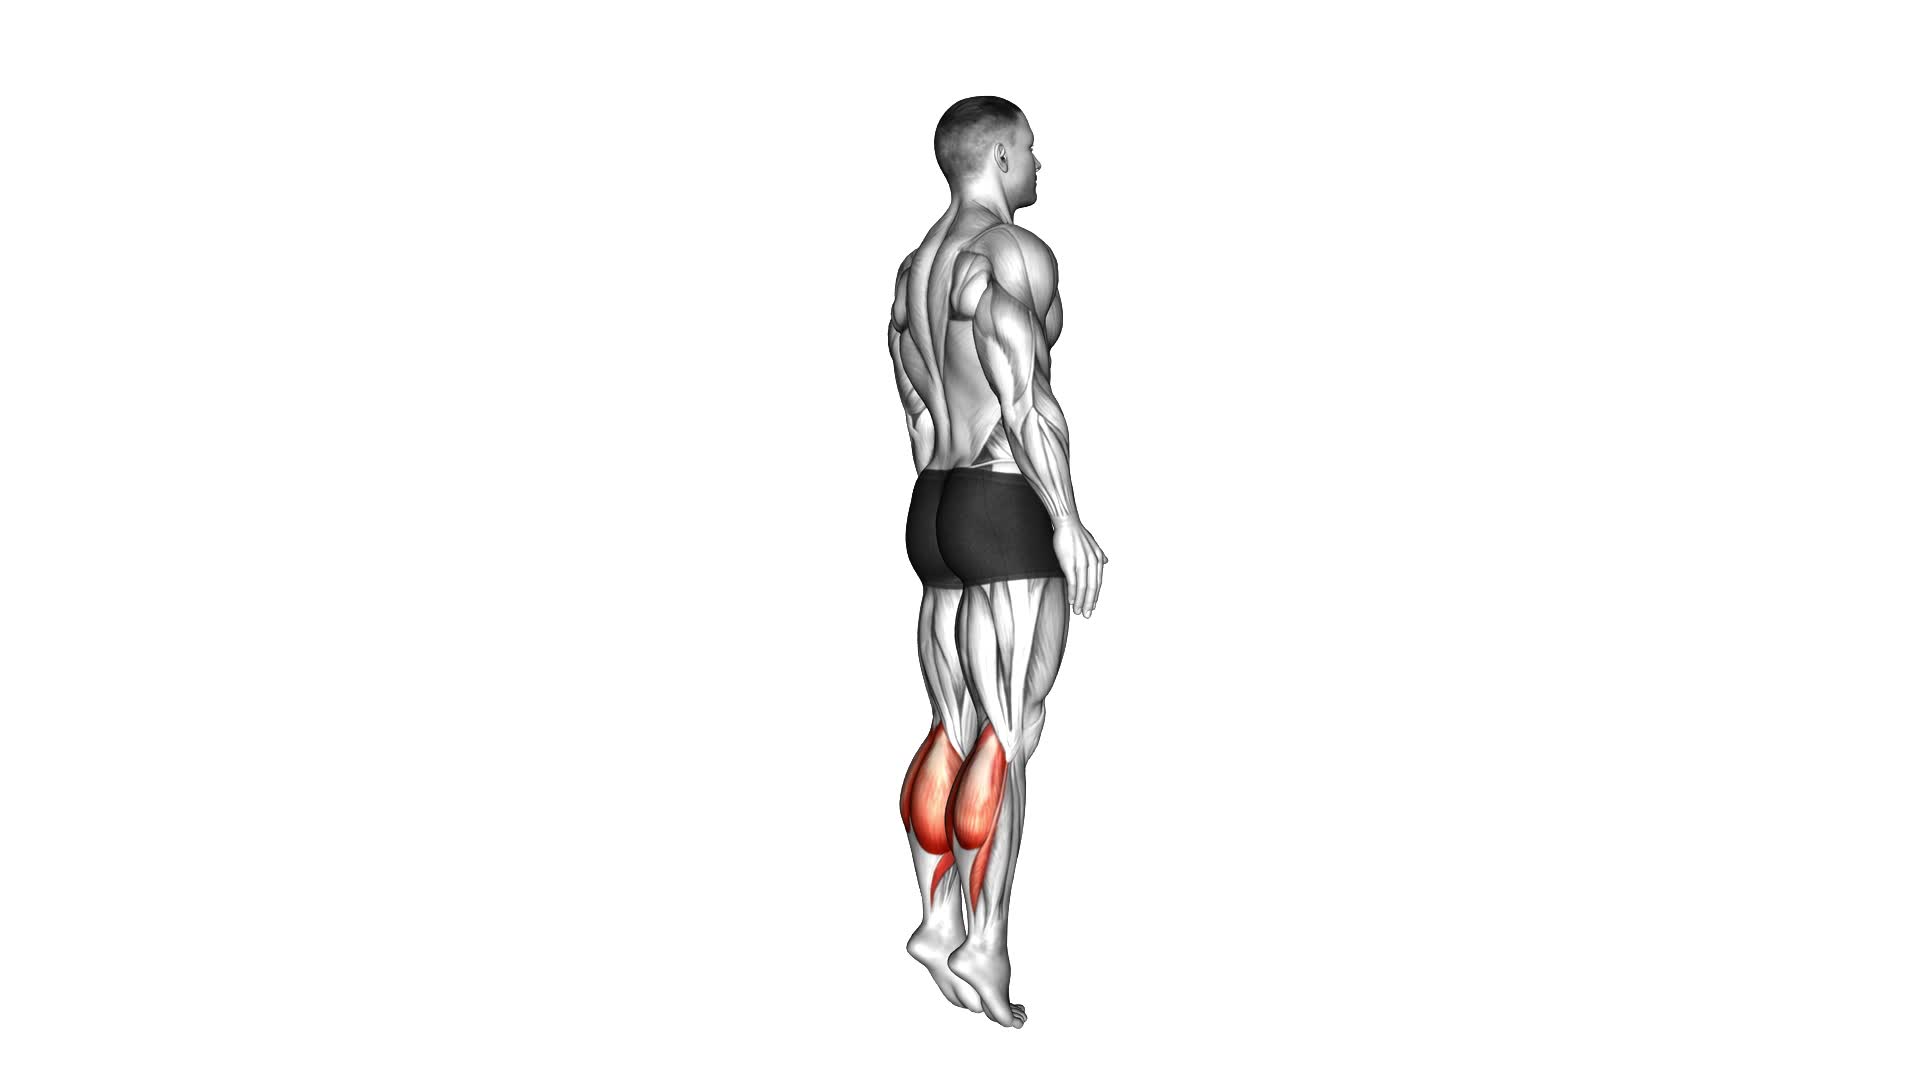 Bodyweight Standing Calf Raise - Video Exercise Guide & Tips